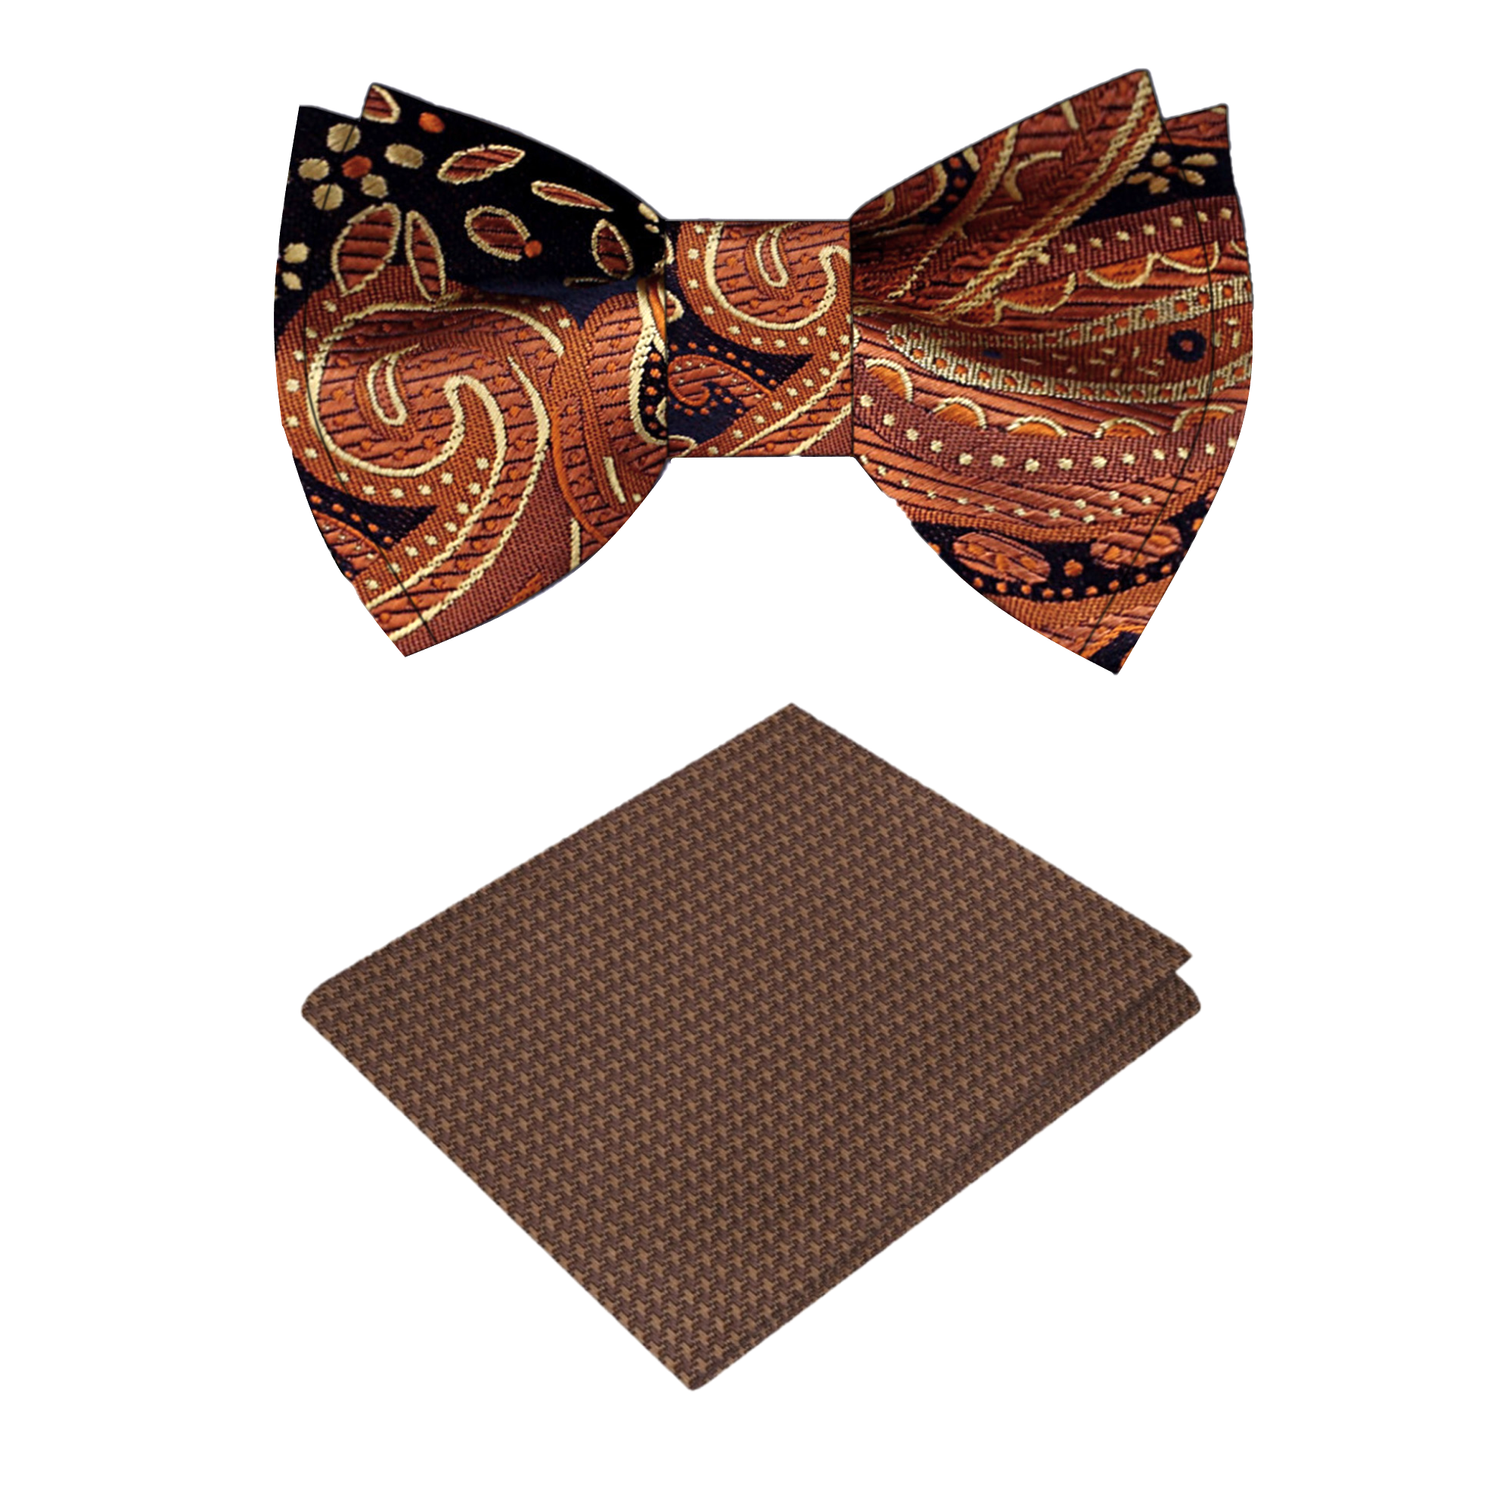 Shades of Brown Paisley Bow Tie and Brown Square